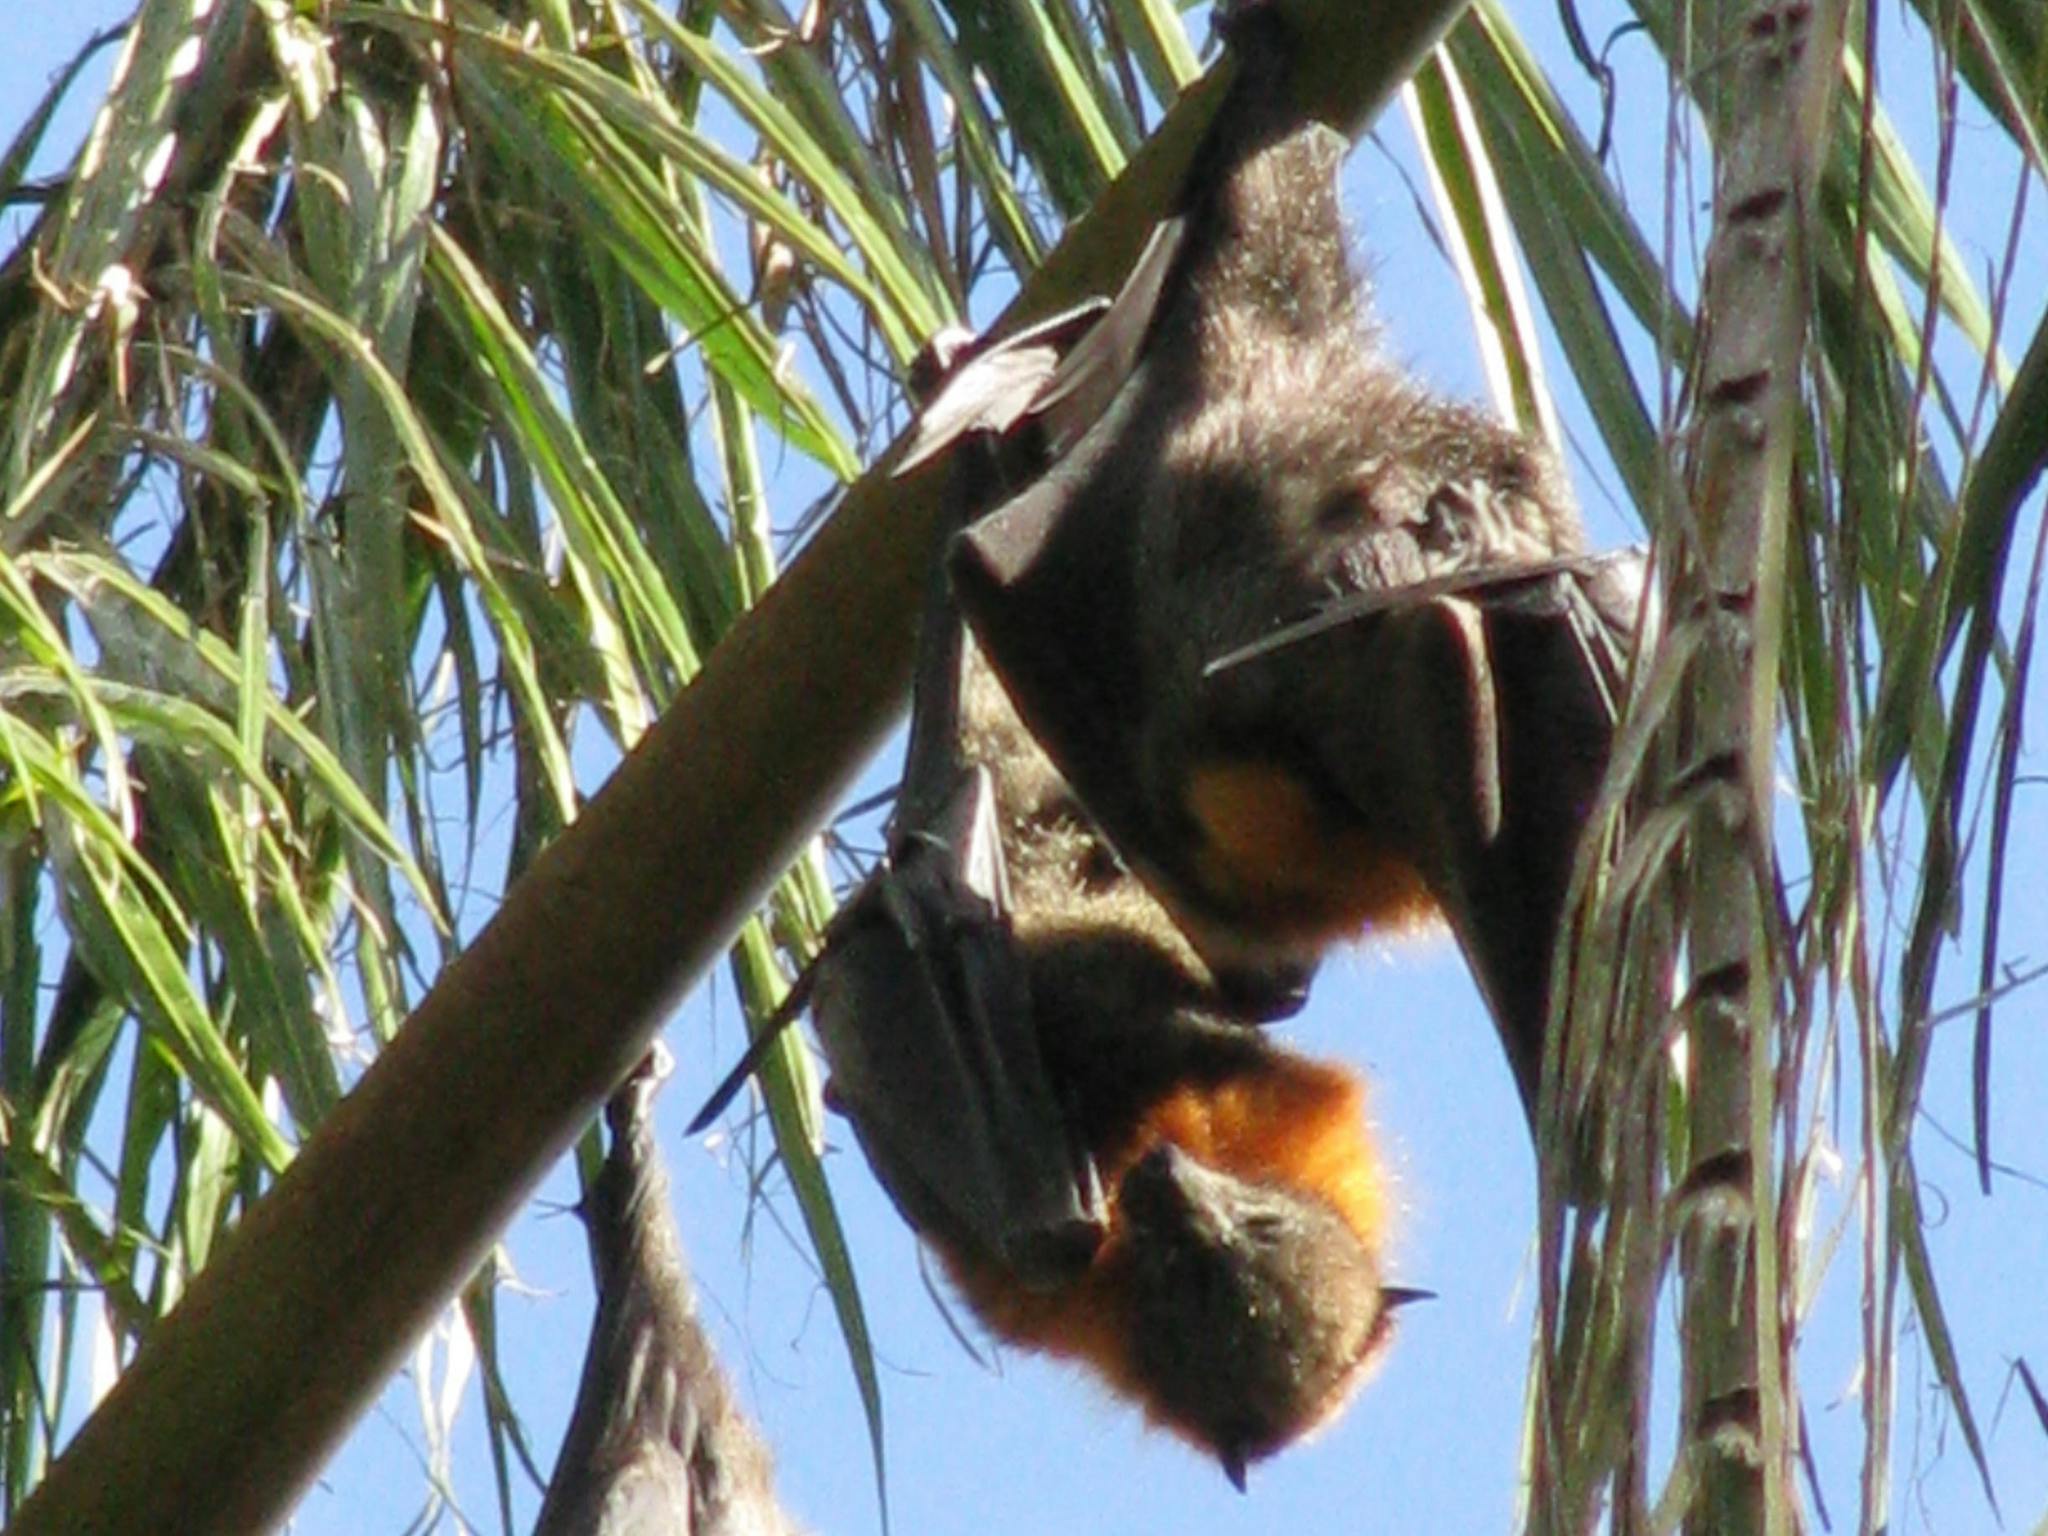 Grey-headed flying-foxes hanging from palm fronds.